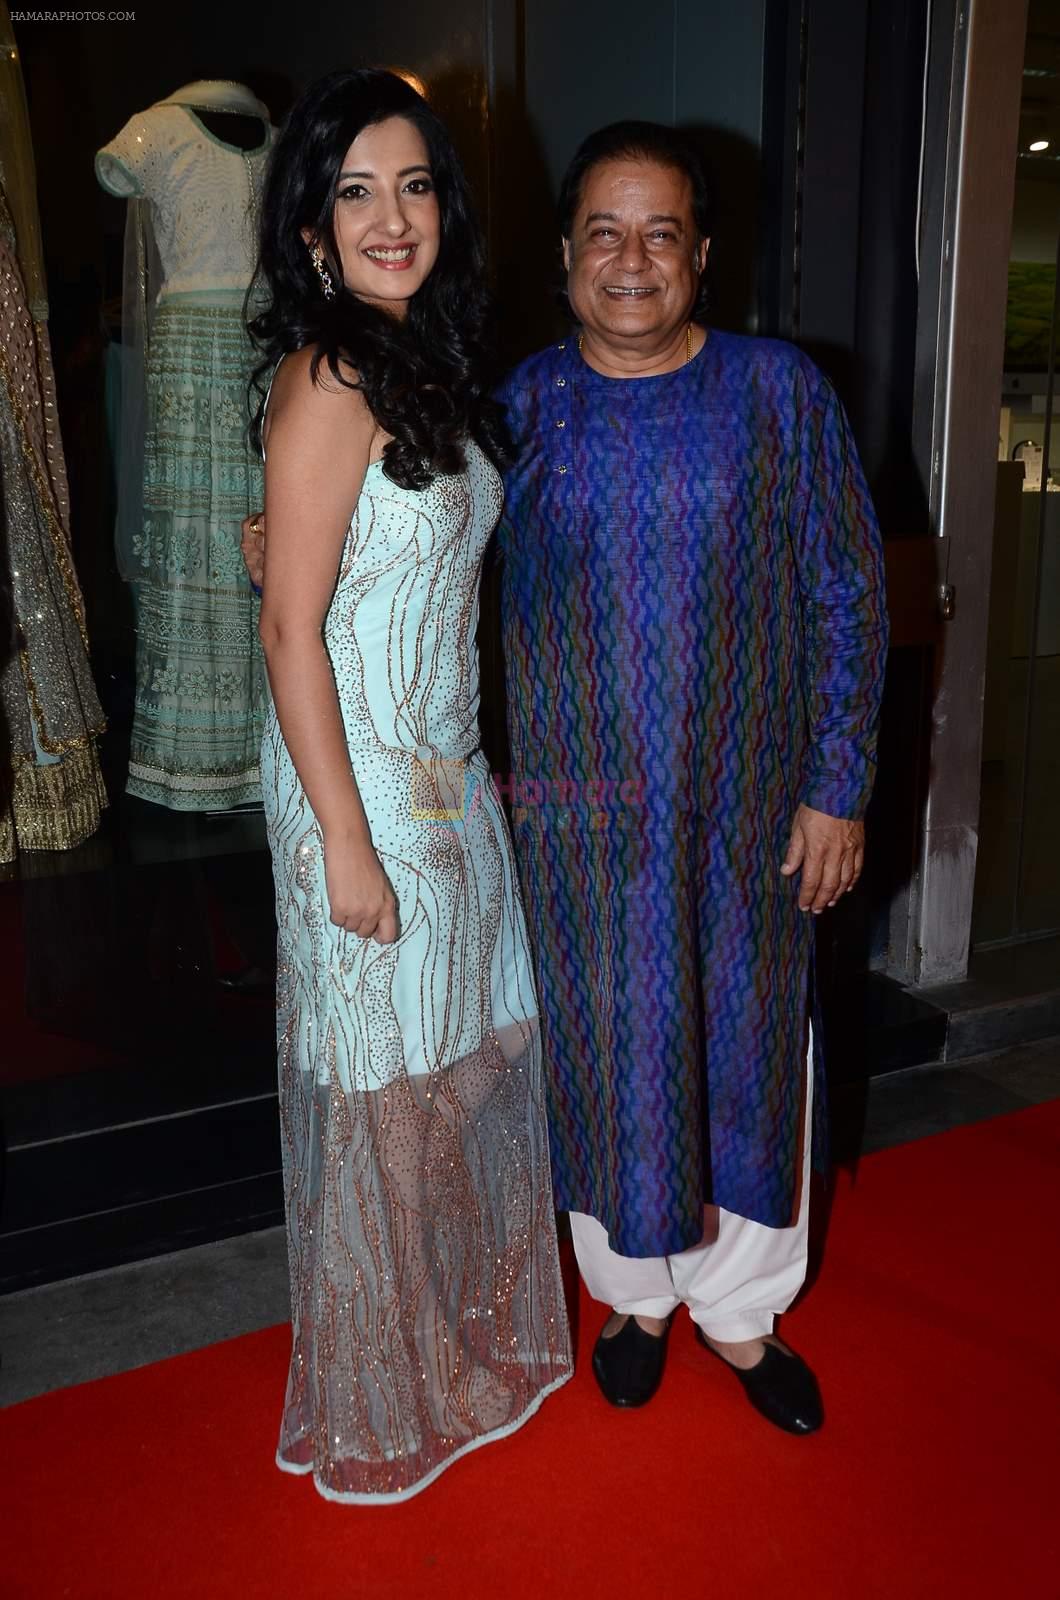 Anup Jalota at the launch of Amy Billimoria and Pankti Shah's store launch in Juhu, Mumbai on 7th May 2015